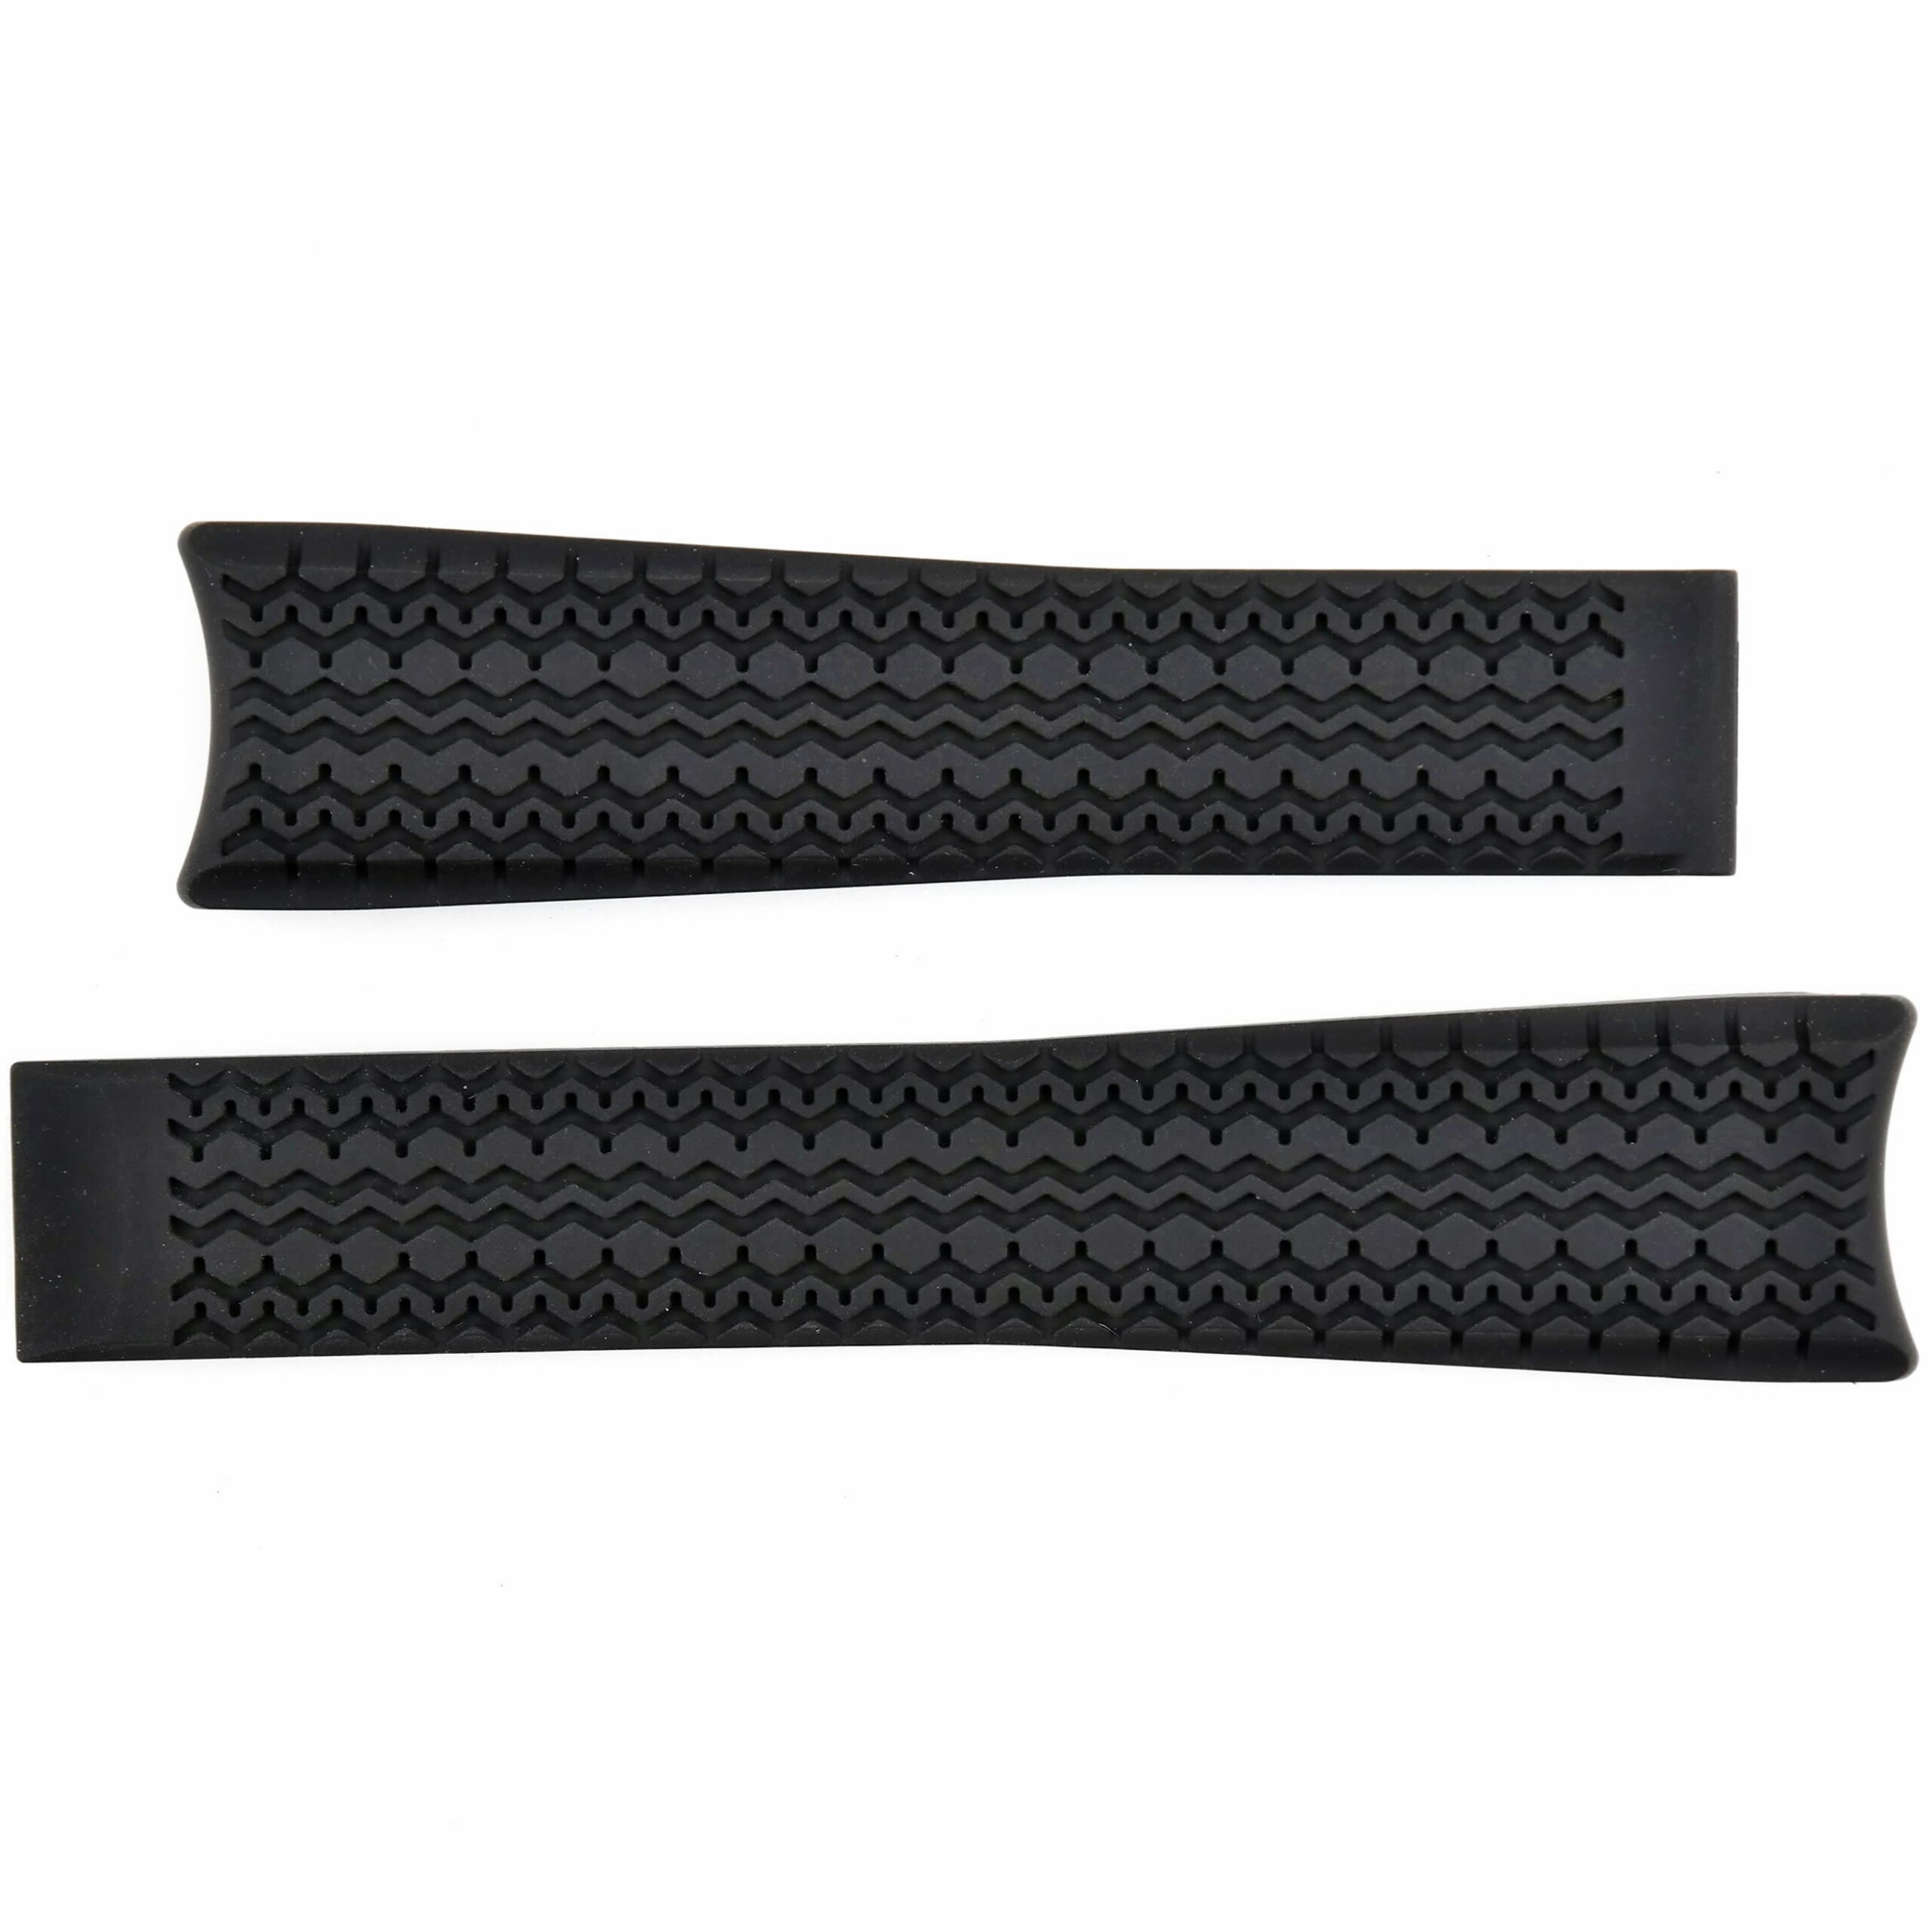 Authentic TAG Heuer Watch Strap - Rubber - 22 mm - FT6033 - Grand Prix